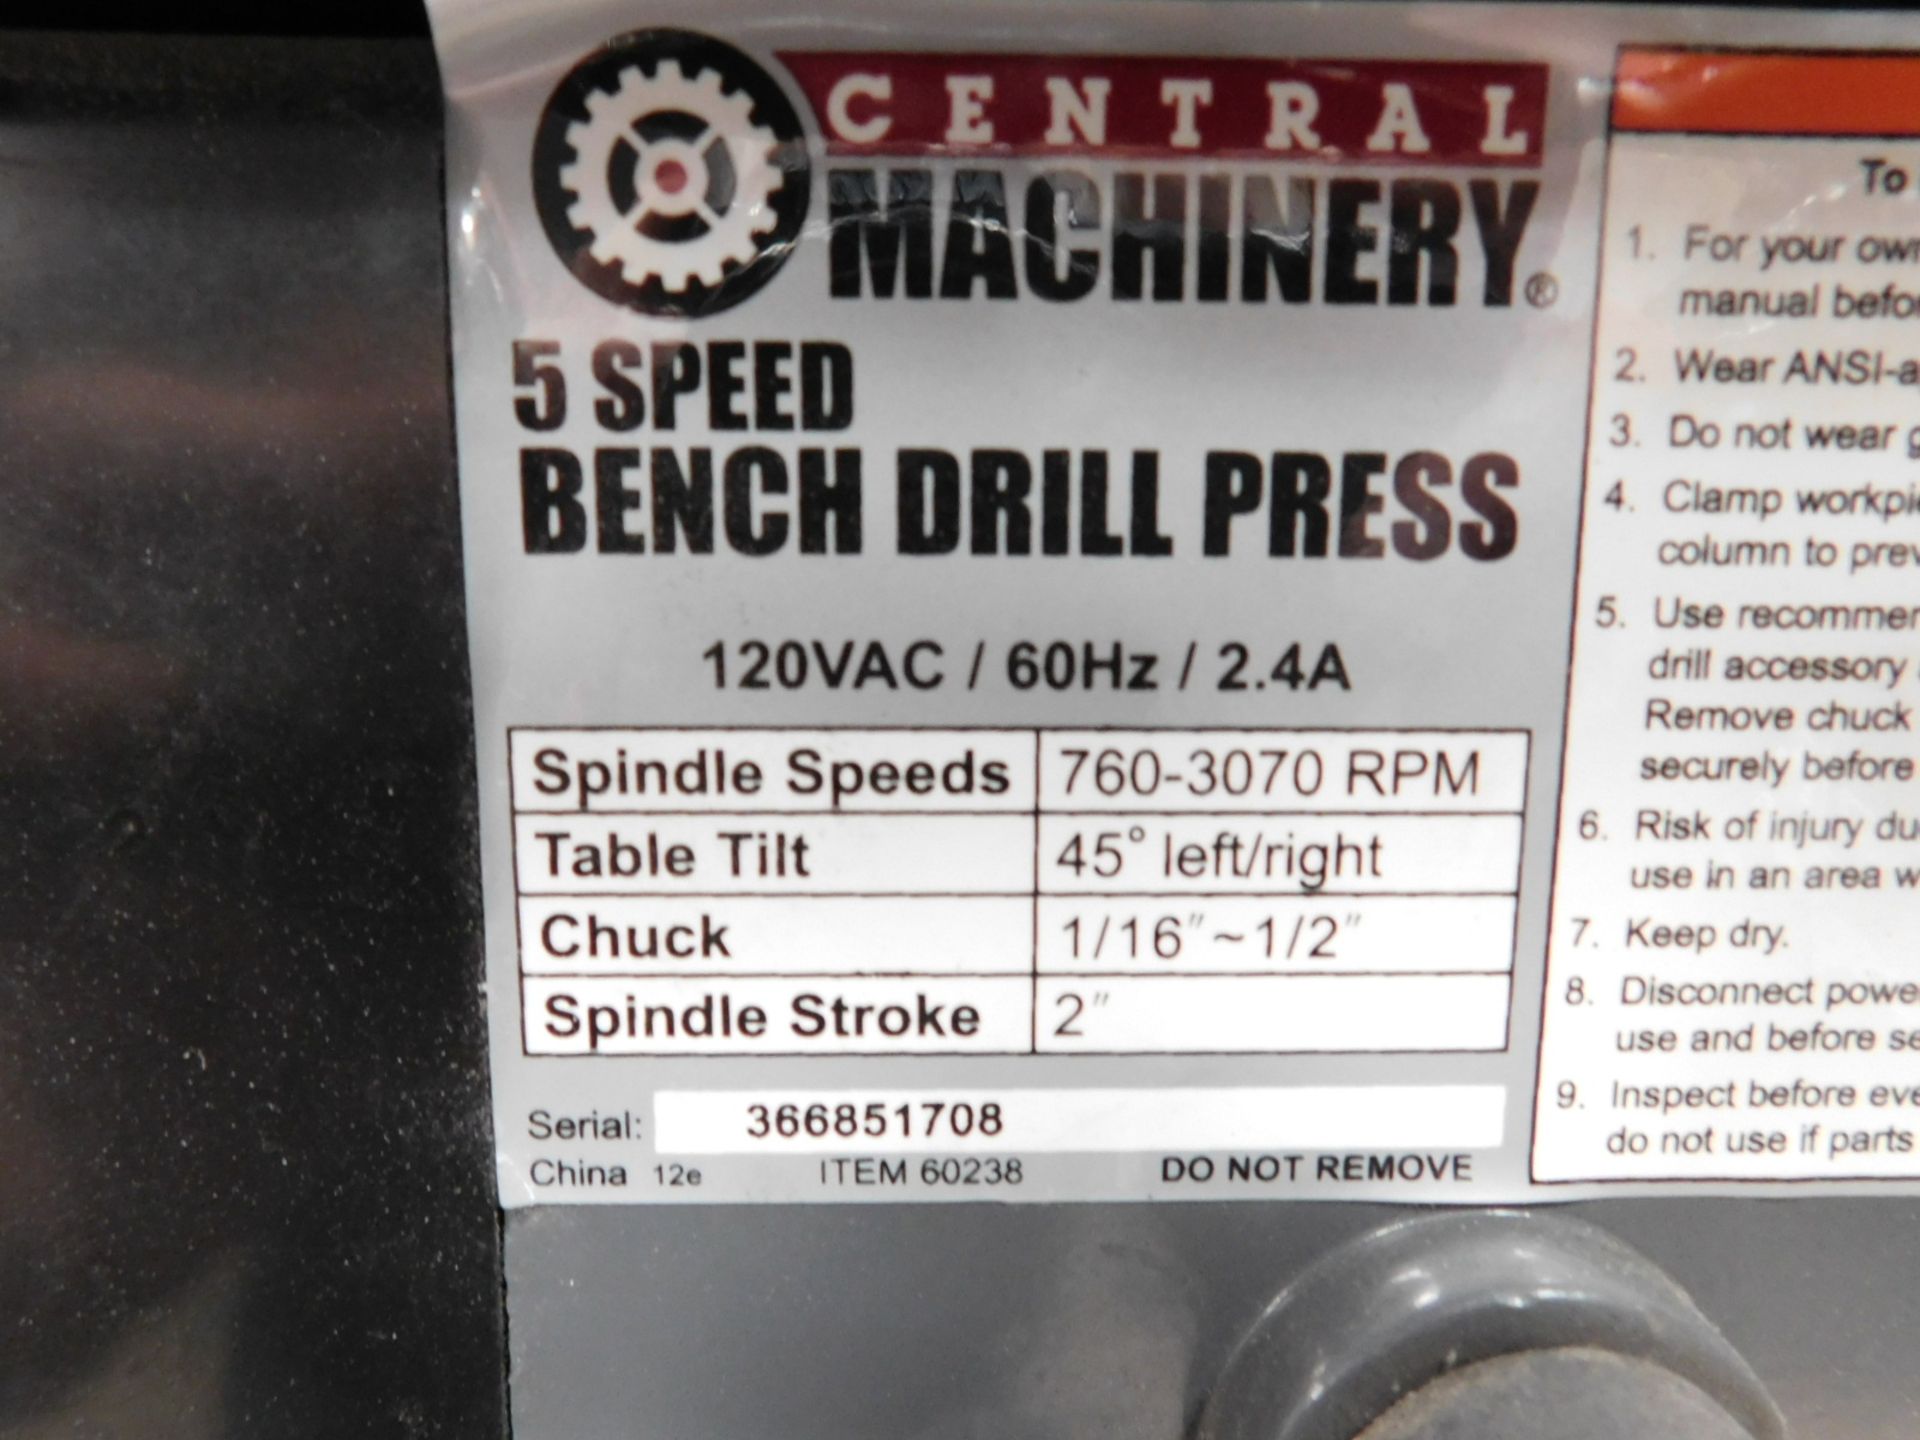 CENTRAL MACHINERY 8" BENCHTOP DRILL PRESS, 5-SPEED, S/N 366851708 - Image 3 of 3